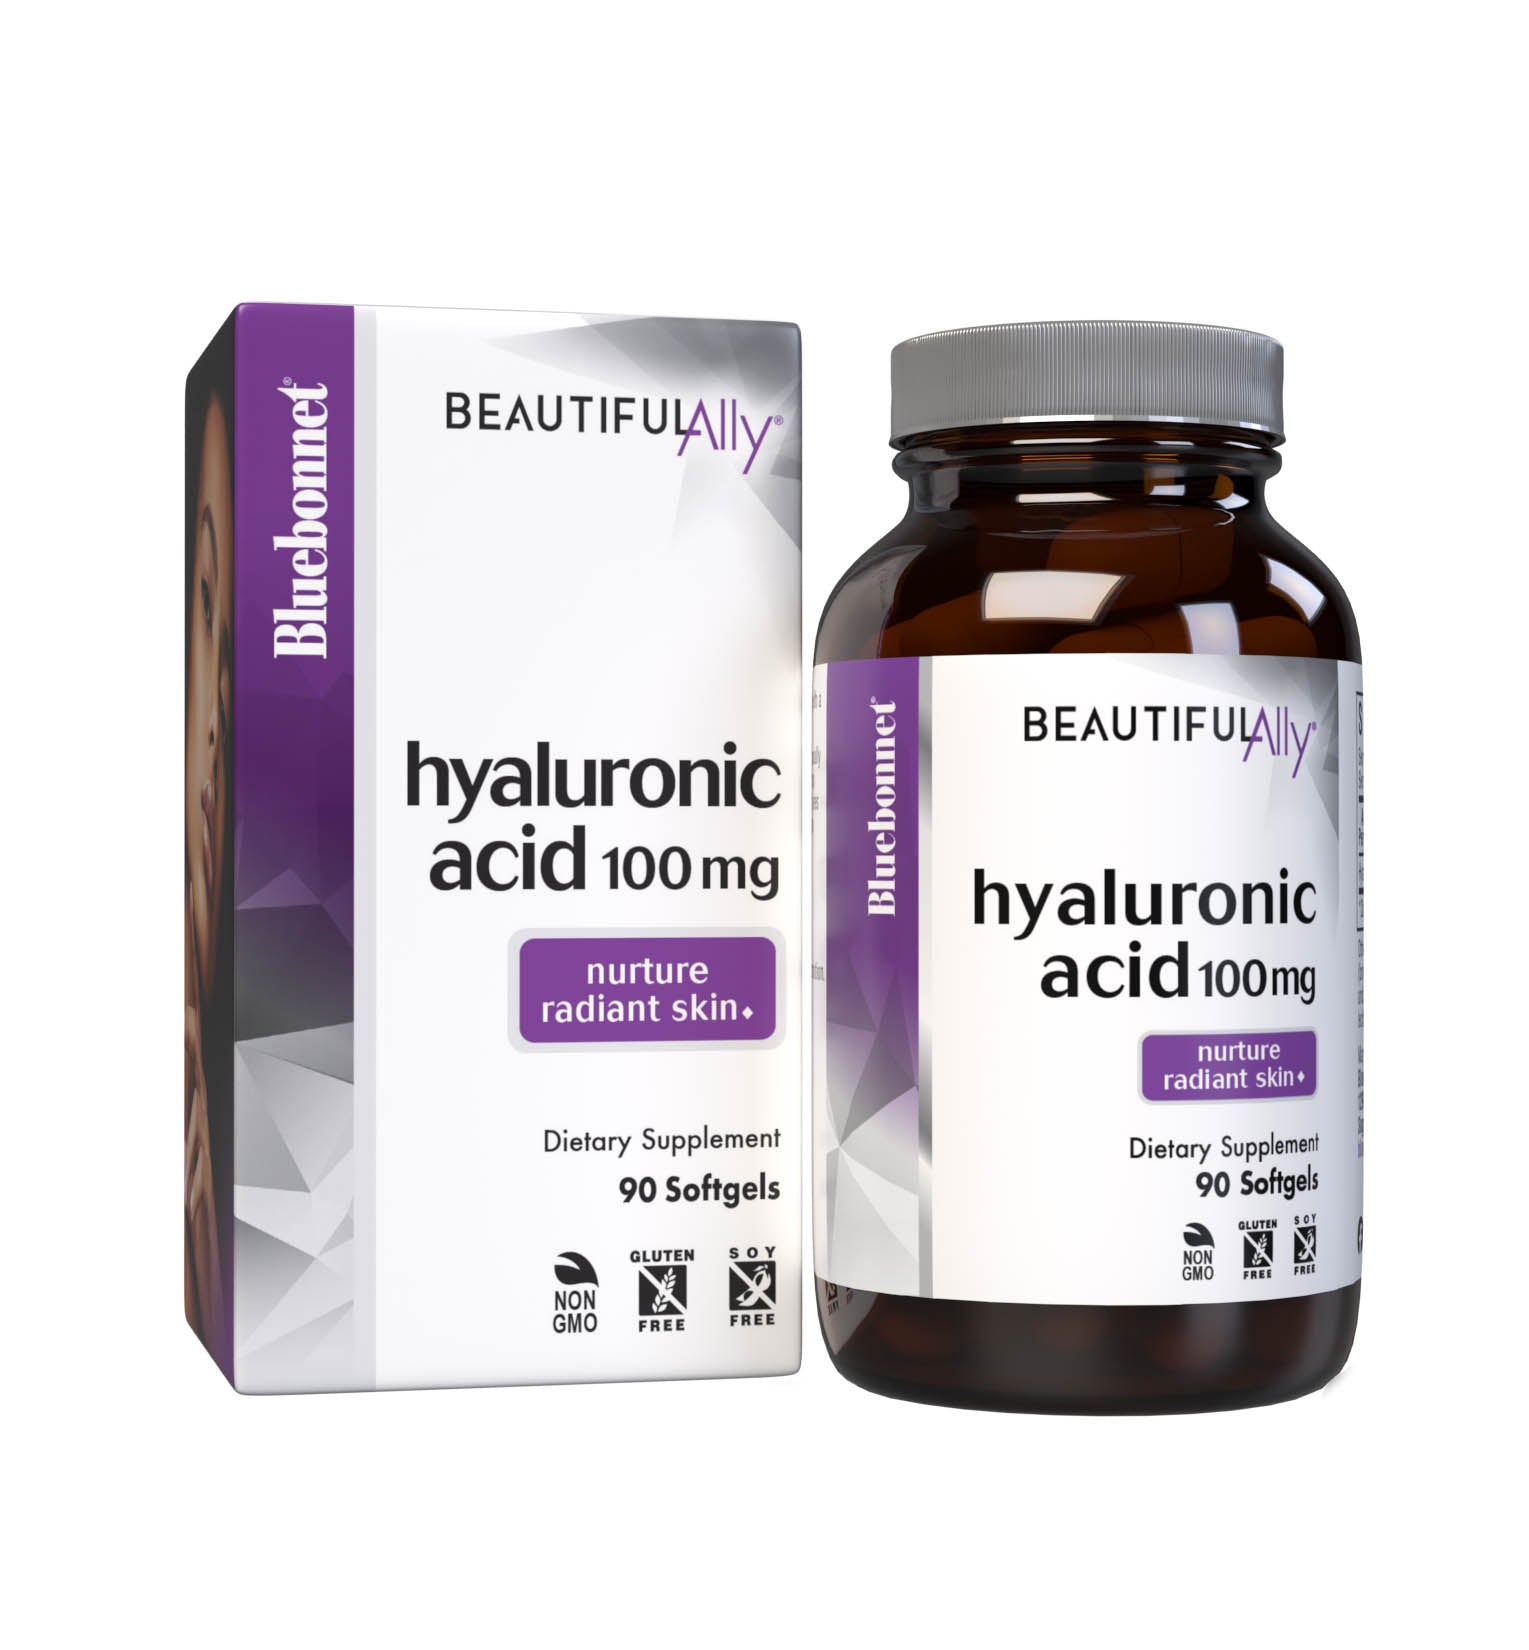 Bluebonnet’s Beautiful Ally Hyaluronic Acid 100 mg 90 Softgels are specially formulated to help increase skin hydration and repair with vegan-sourced hyaluronic acid in a base of non-GMO sunflower oil. Hyaluronic acid serves as a cushion and lubricant with the skin tp help create a more supple, luminescent, youthful appearance. With box. #size_90 count